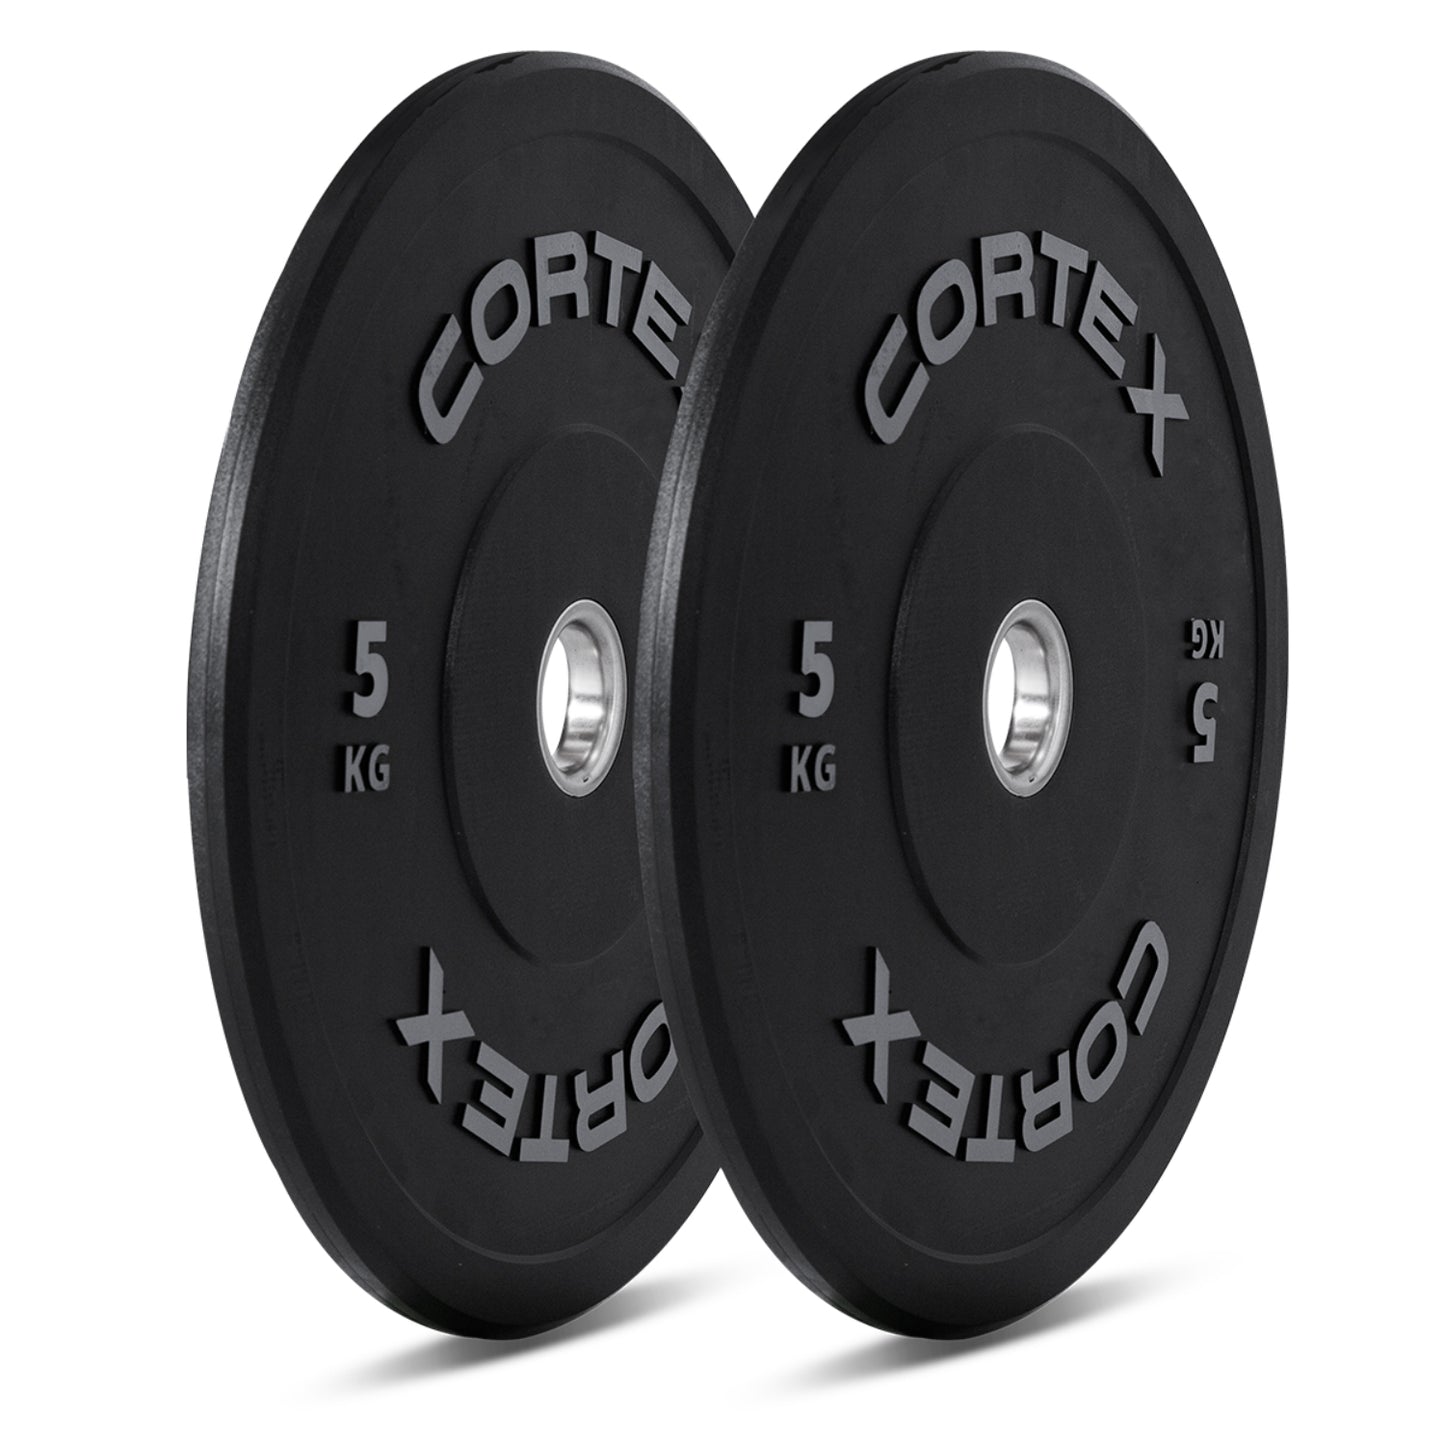 CORTEX 260kg Black Series V2 Rubber Olympic Bumper Plate Set 50mm with ZEUS100 Barbell